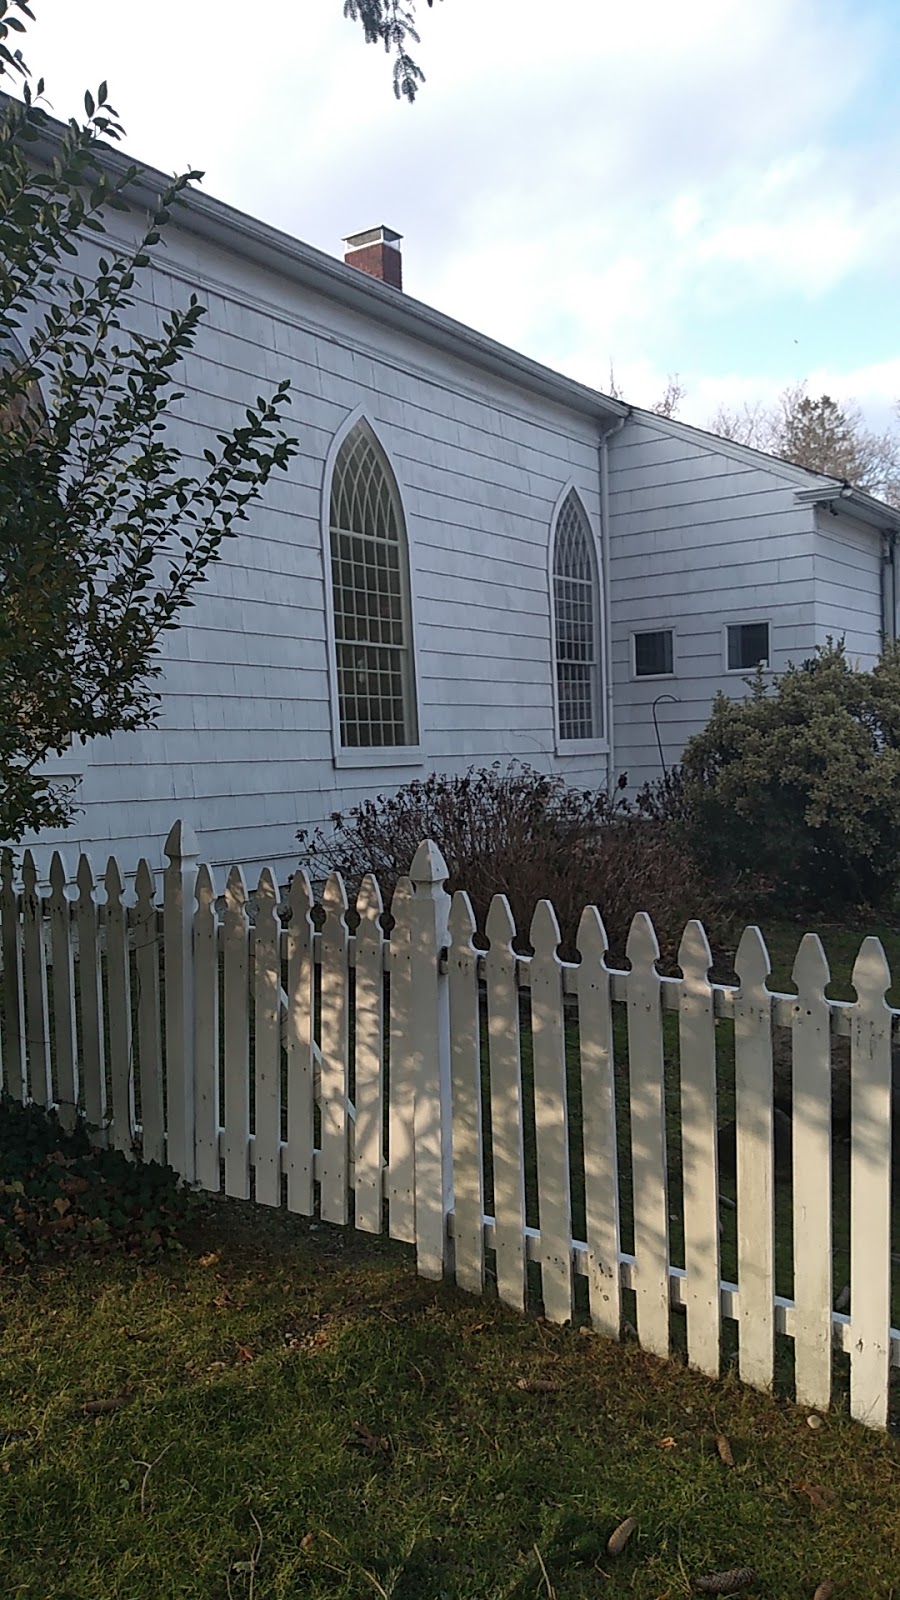 Middle Island United Church | 271 Middle Country Rd, Middle Island, NY 11953 | Phone: (631) 924-6201